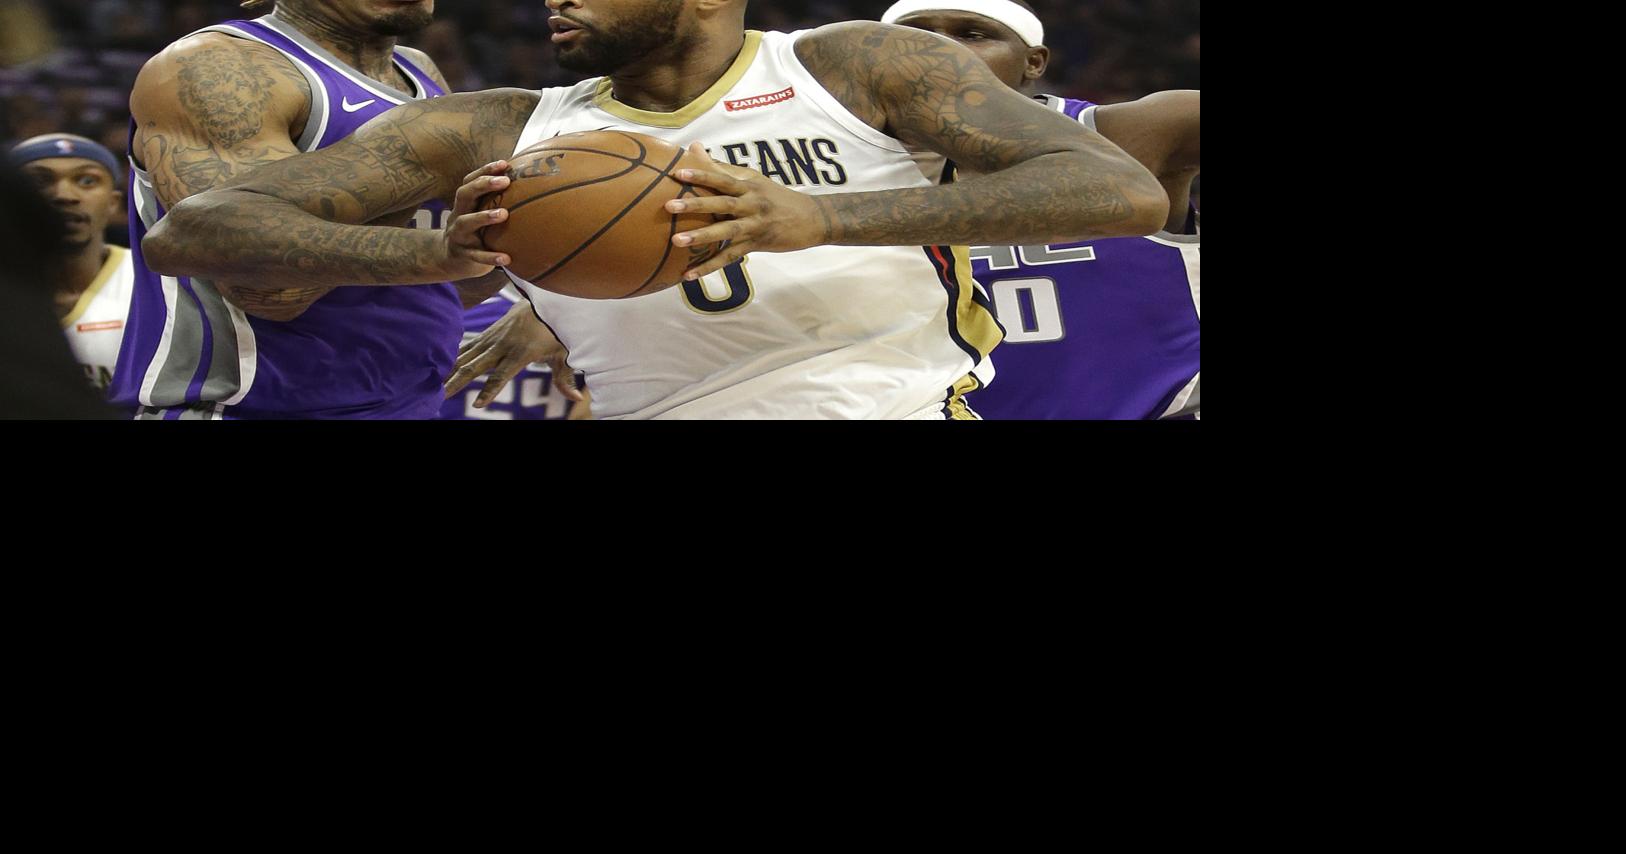 DeMarcus Cousins: Would the Kings rookie dominate in the NBA